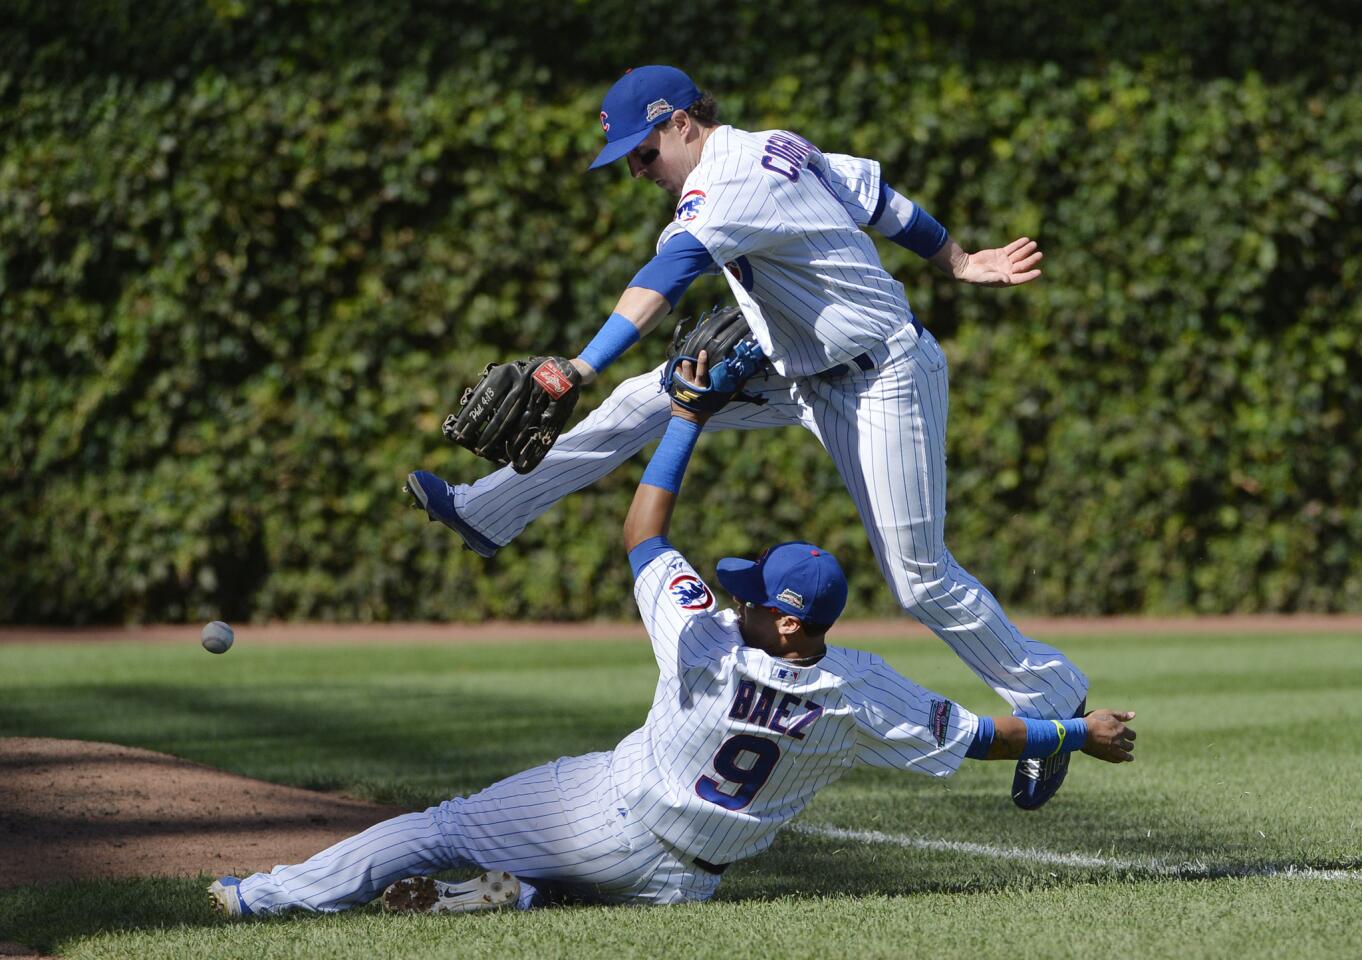 Chris Coghlan and shortstop Javier Baez collide as they go for a pop foul during the eleventh inning.